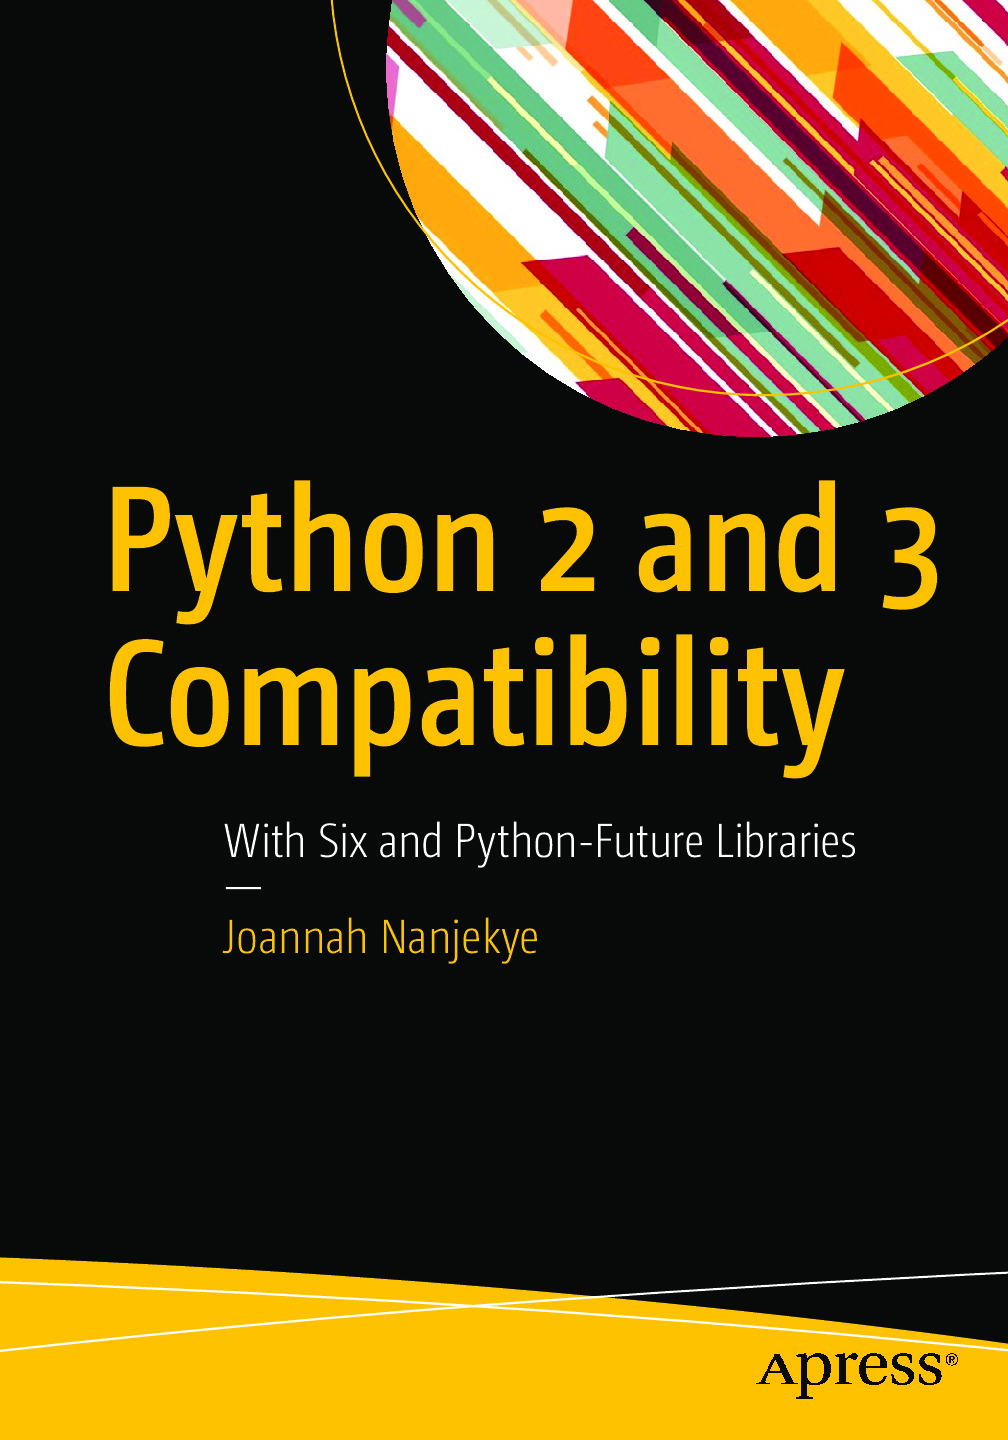 Python 2 and 3 Compatibility – With Six and Python-Future Libraries